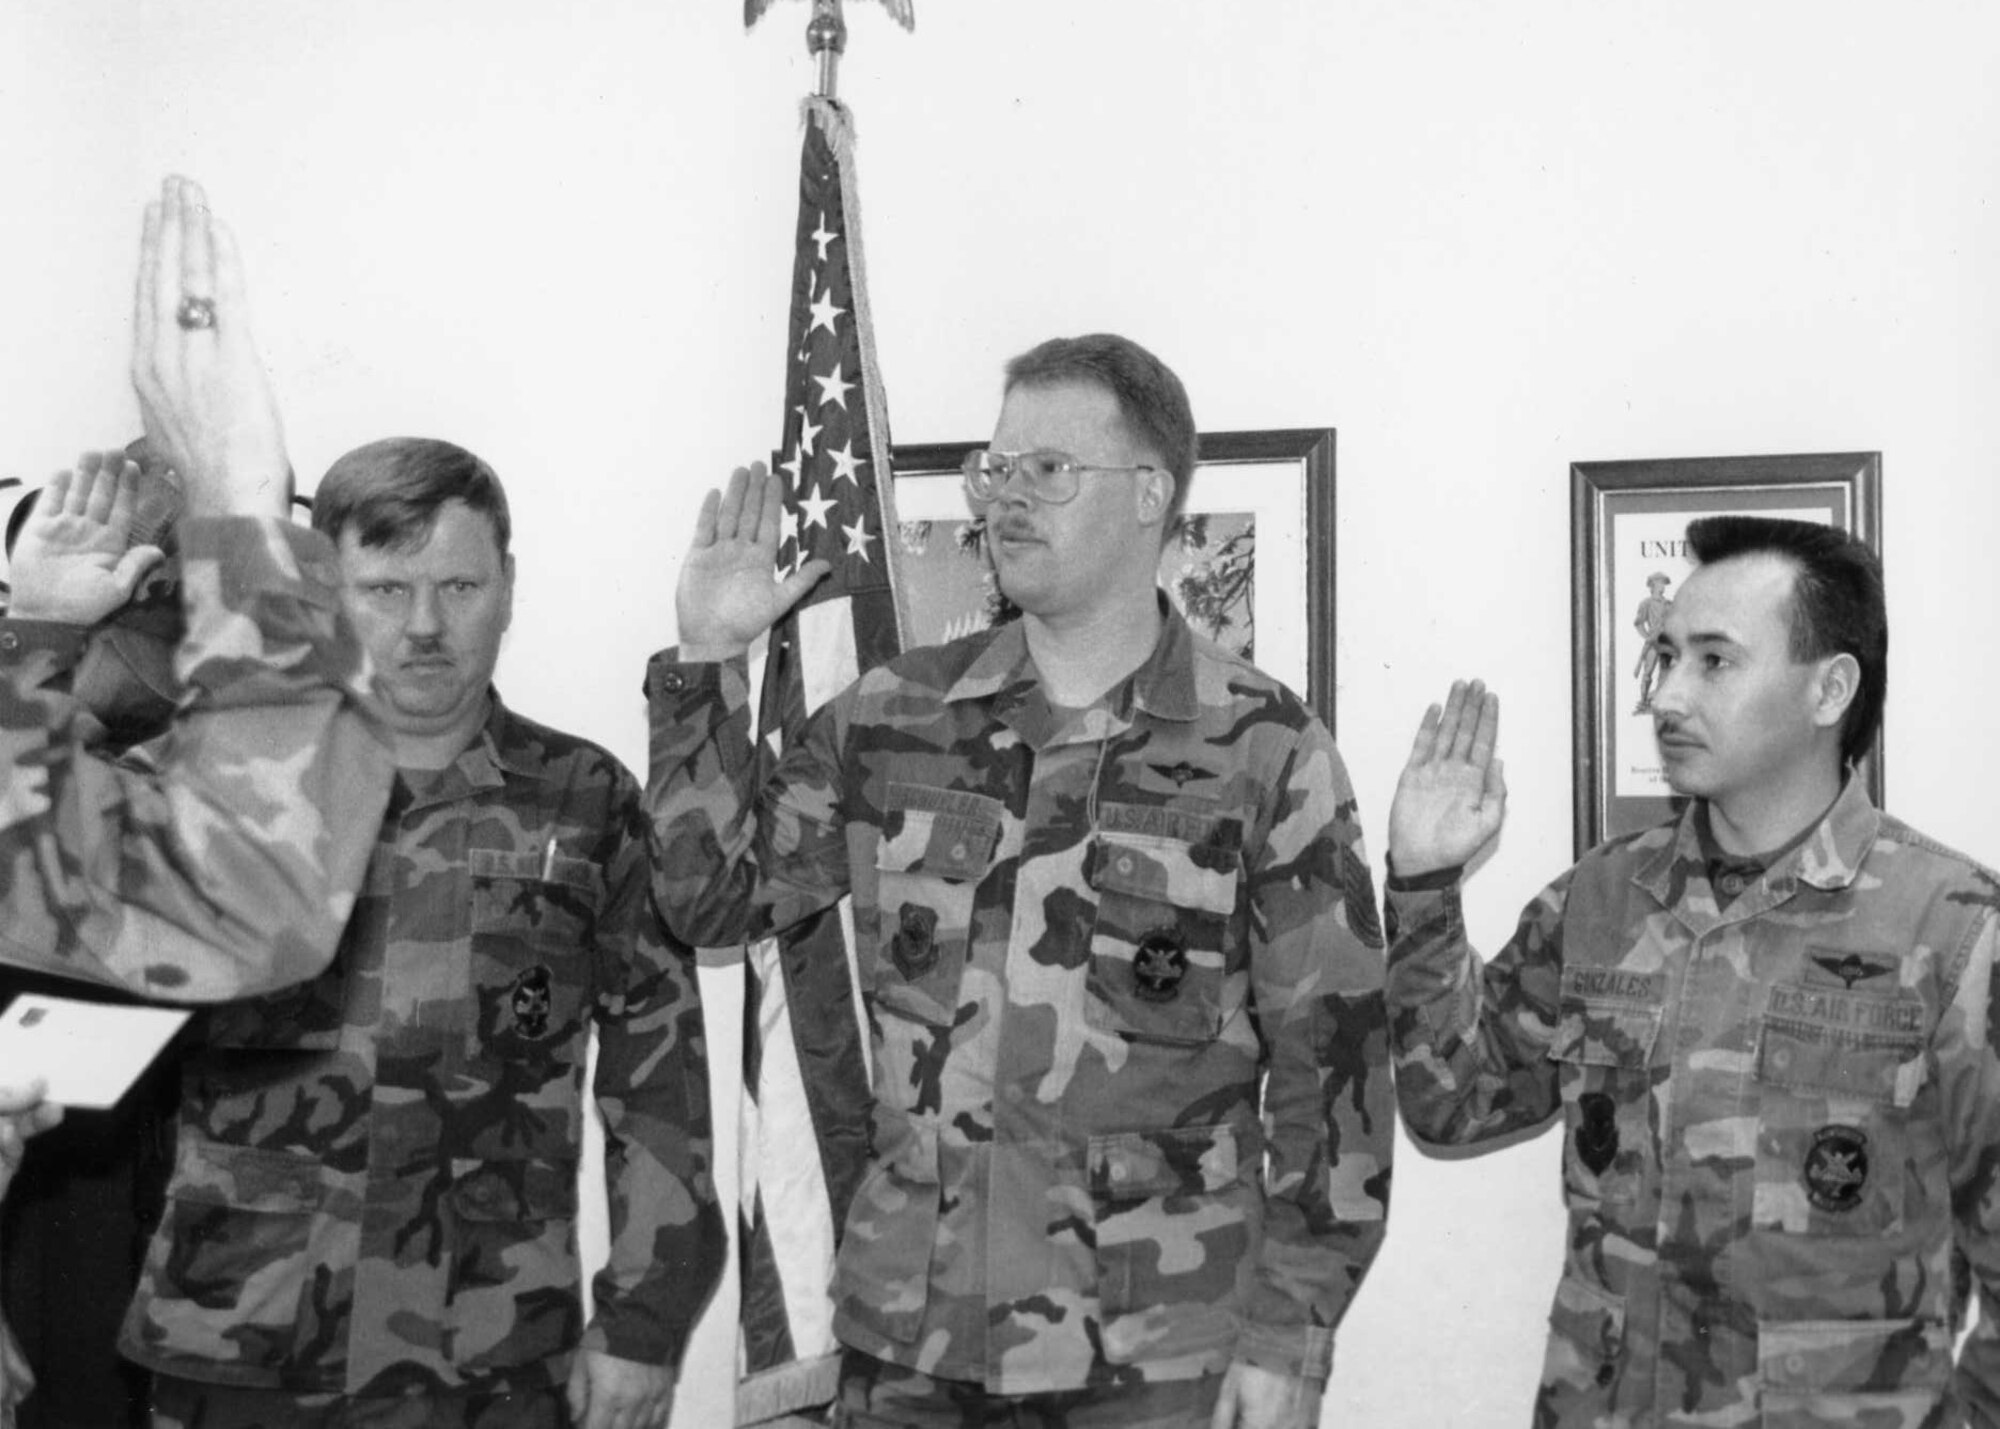 Master Sgt. Kirby Schueler raises his hand circa February 1991, reenlisting just before a deployment to the Middle East in support of Operations Desert Shield/Desert Storm. (Courtesy photo)